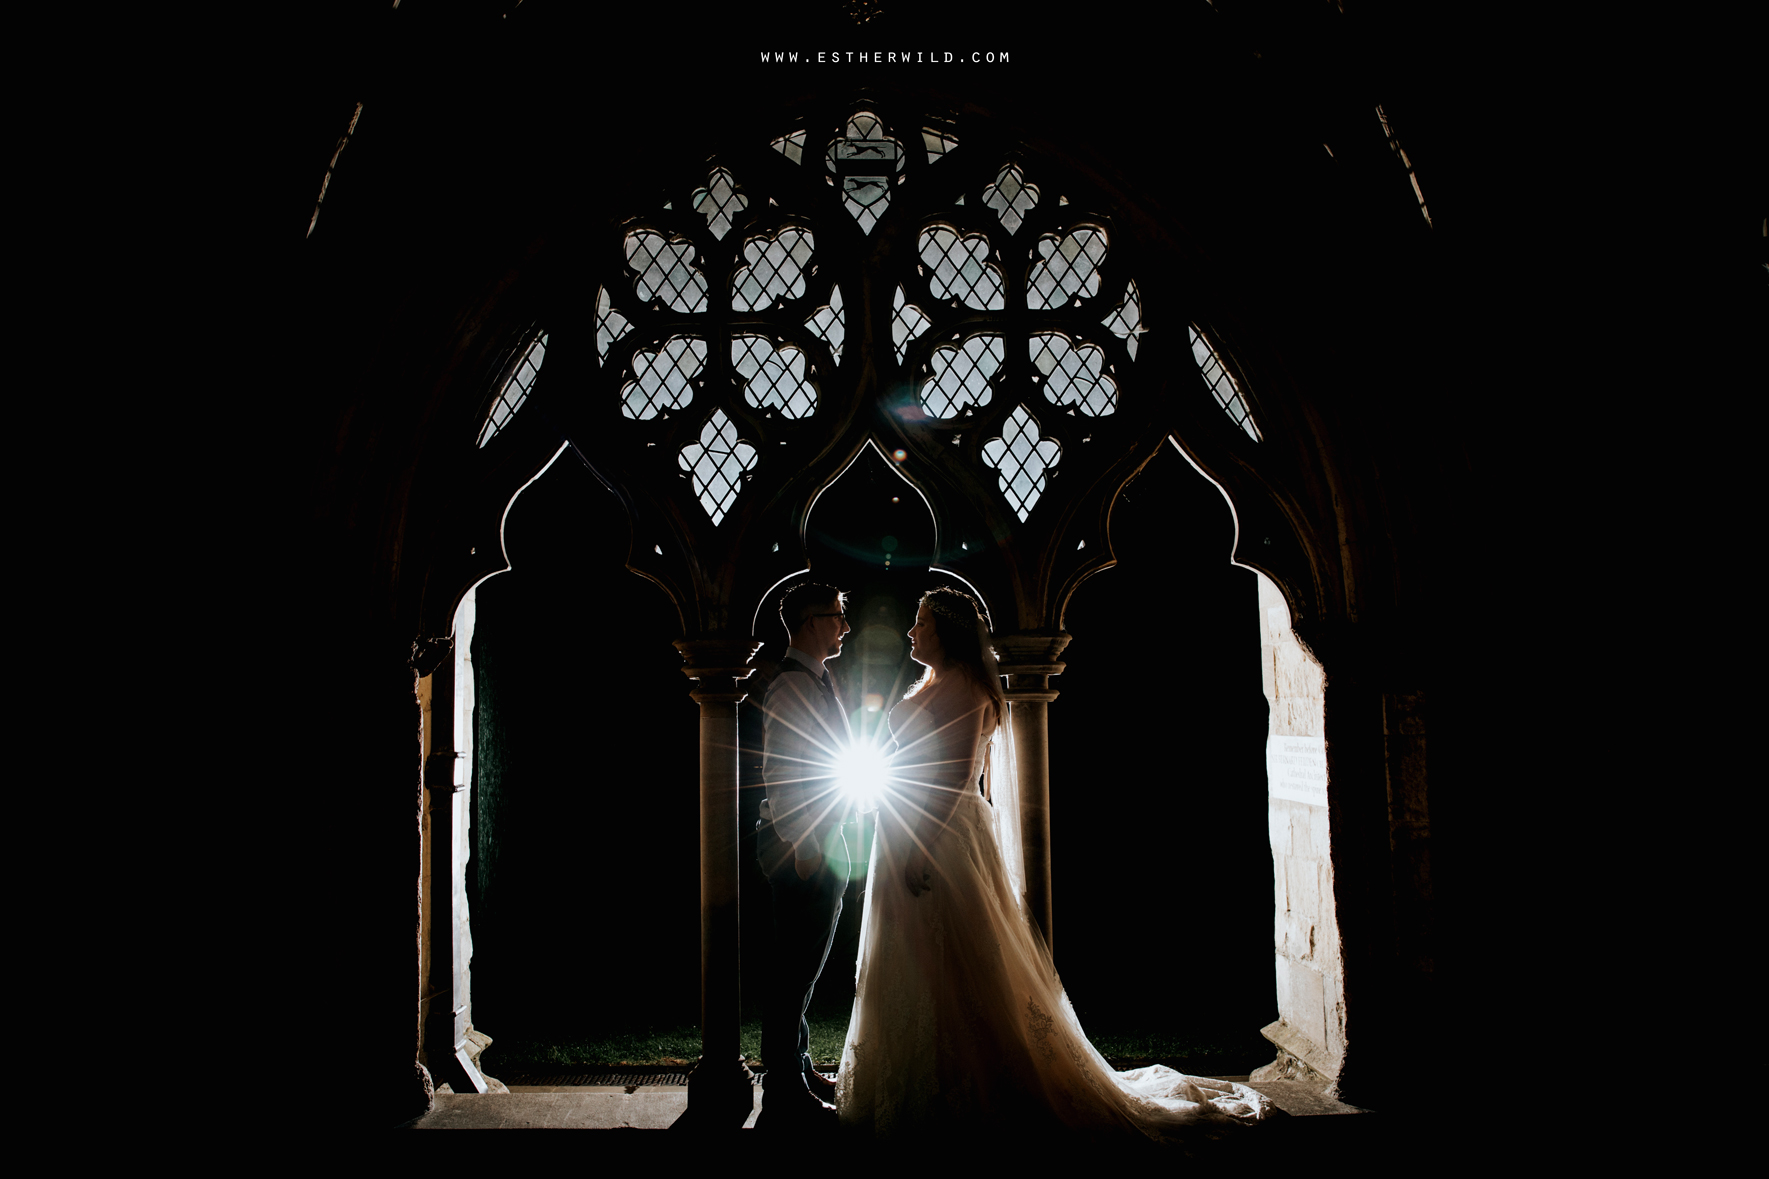 Norwich_Castle_Arcade_Grosvenor_Chip_Birdcage_Cathedral_Cloisters_Refectory_Wedding_Photography_Esther_Wild_Photographer_Norfolk_Kings_Lynn_3R8A3675-1.jpg